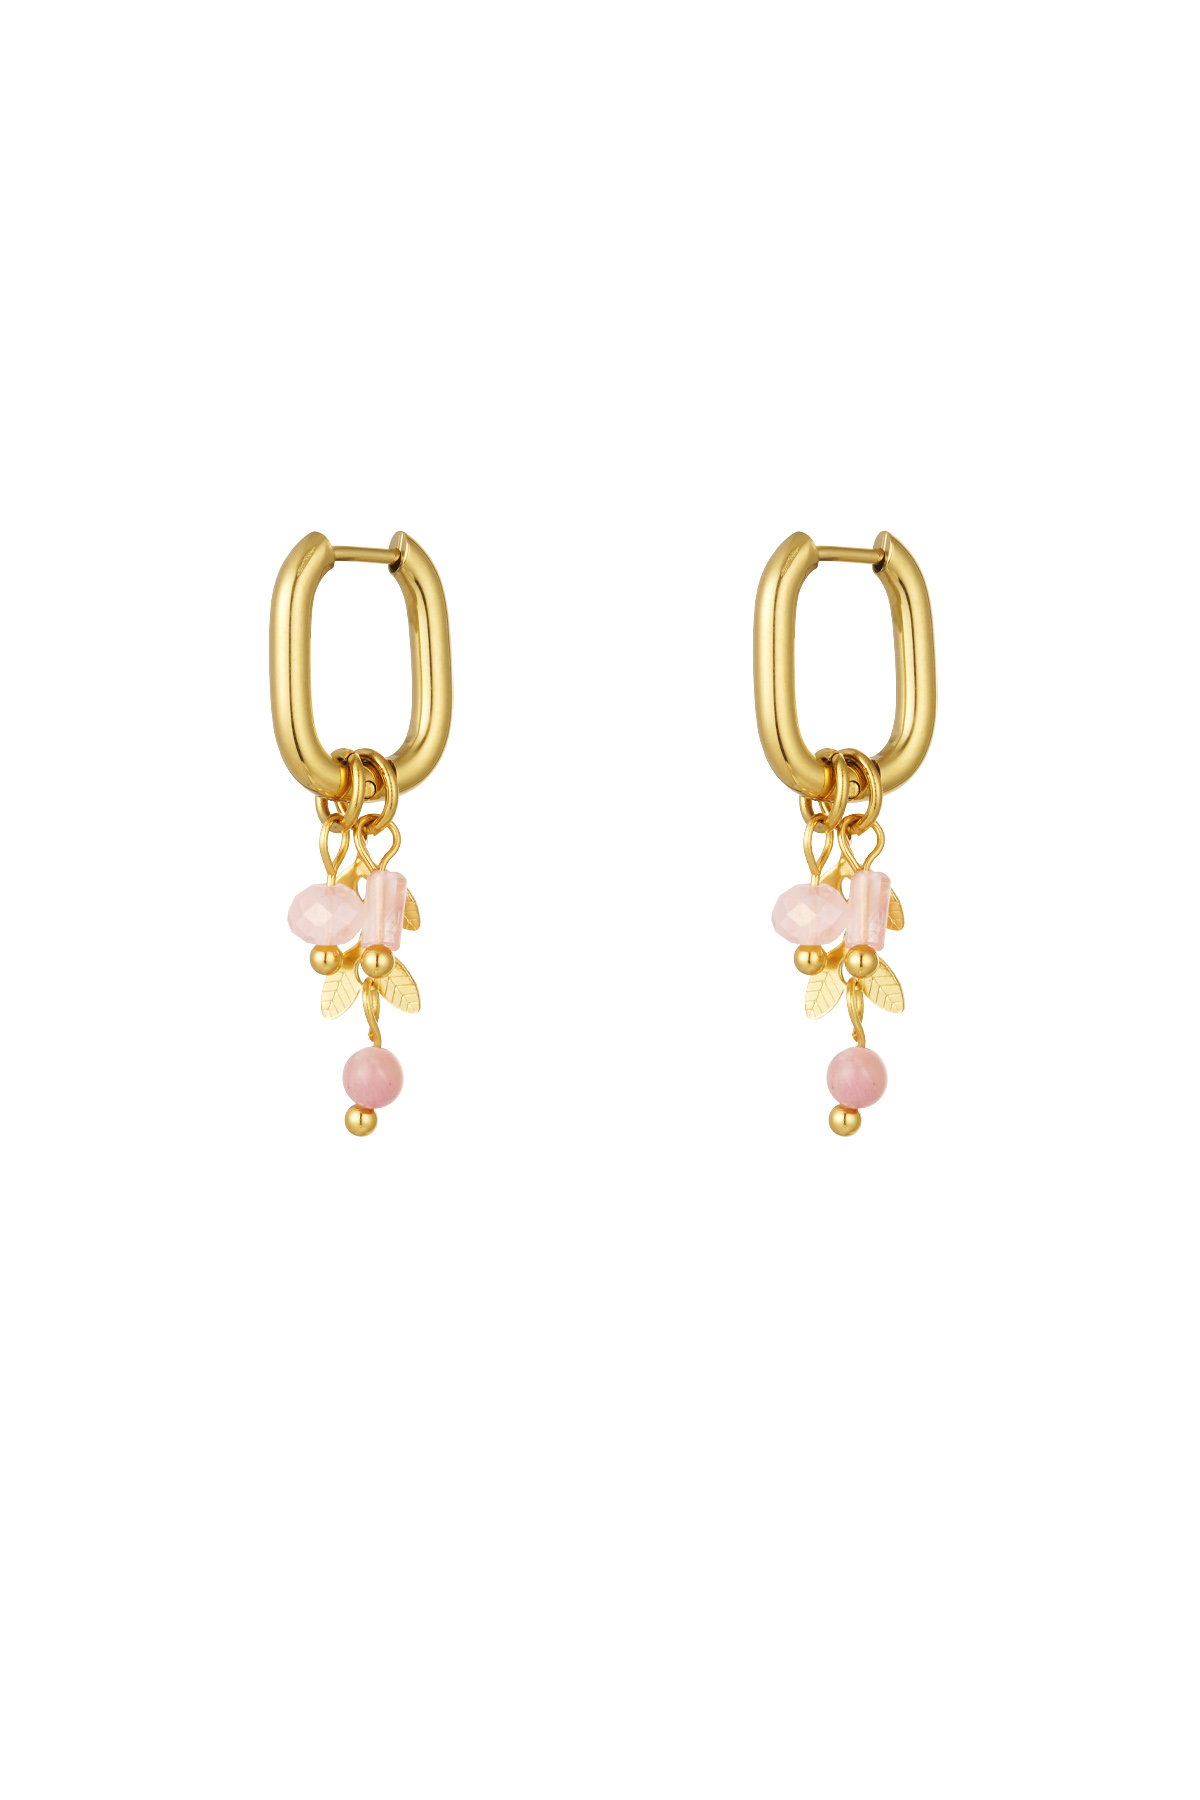 Earrings leaves with stones - gold/pink h5 